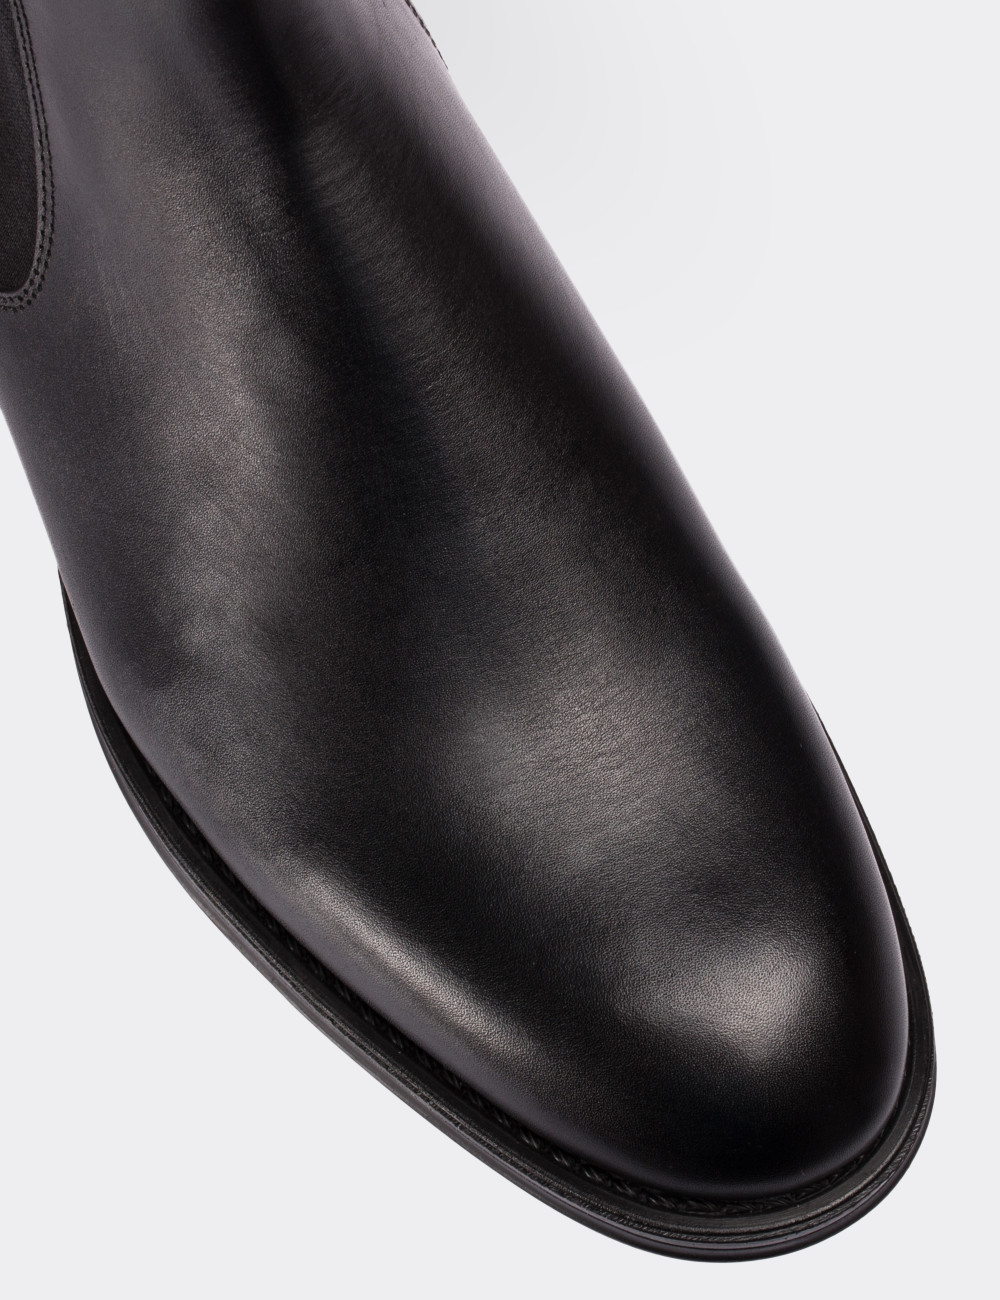 Black  Leather Chelsea Boots - 01620MSYHC09